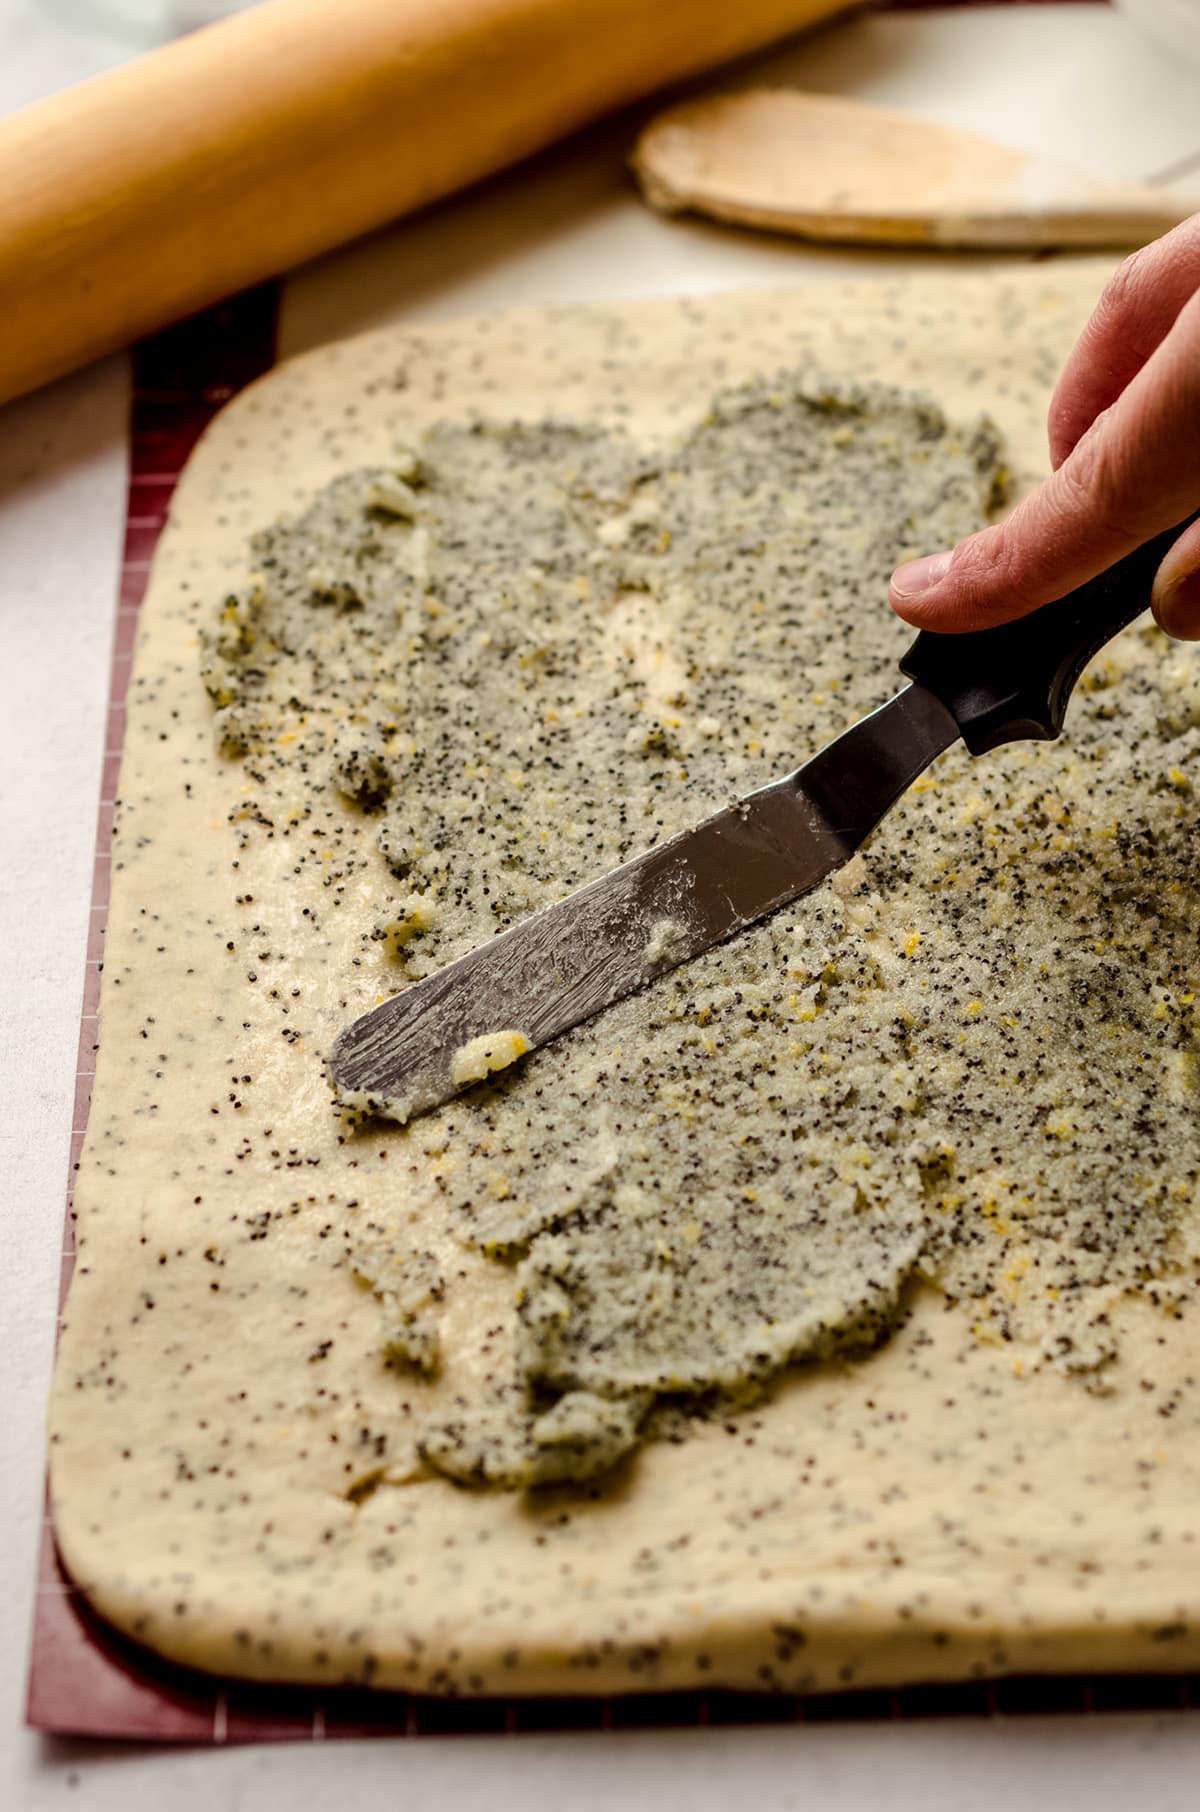 Spreading a lemon poppy seed filling over a sweet dough that has been rolled into a rectangle.